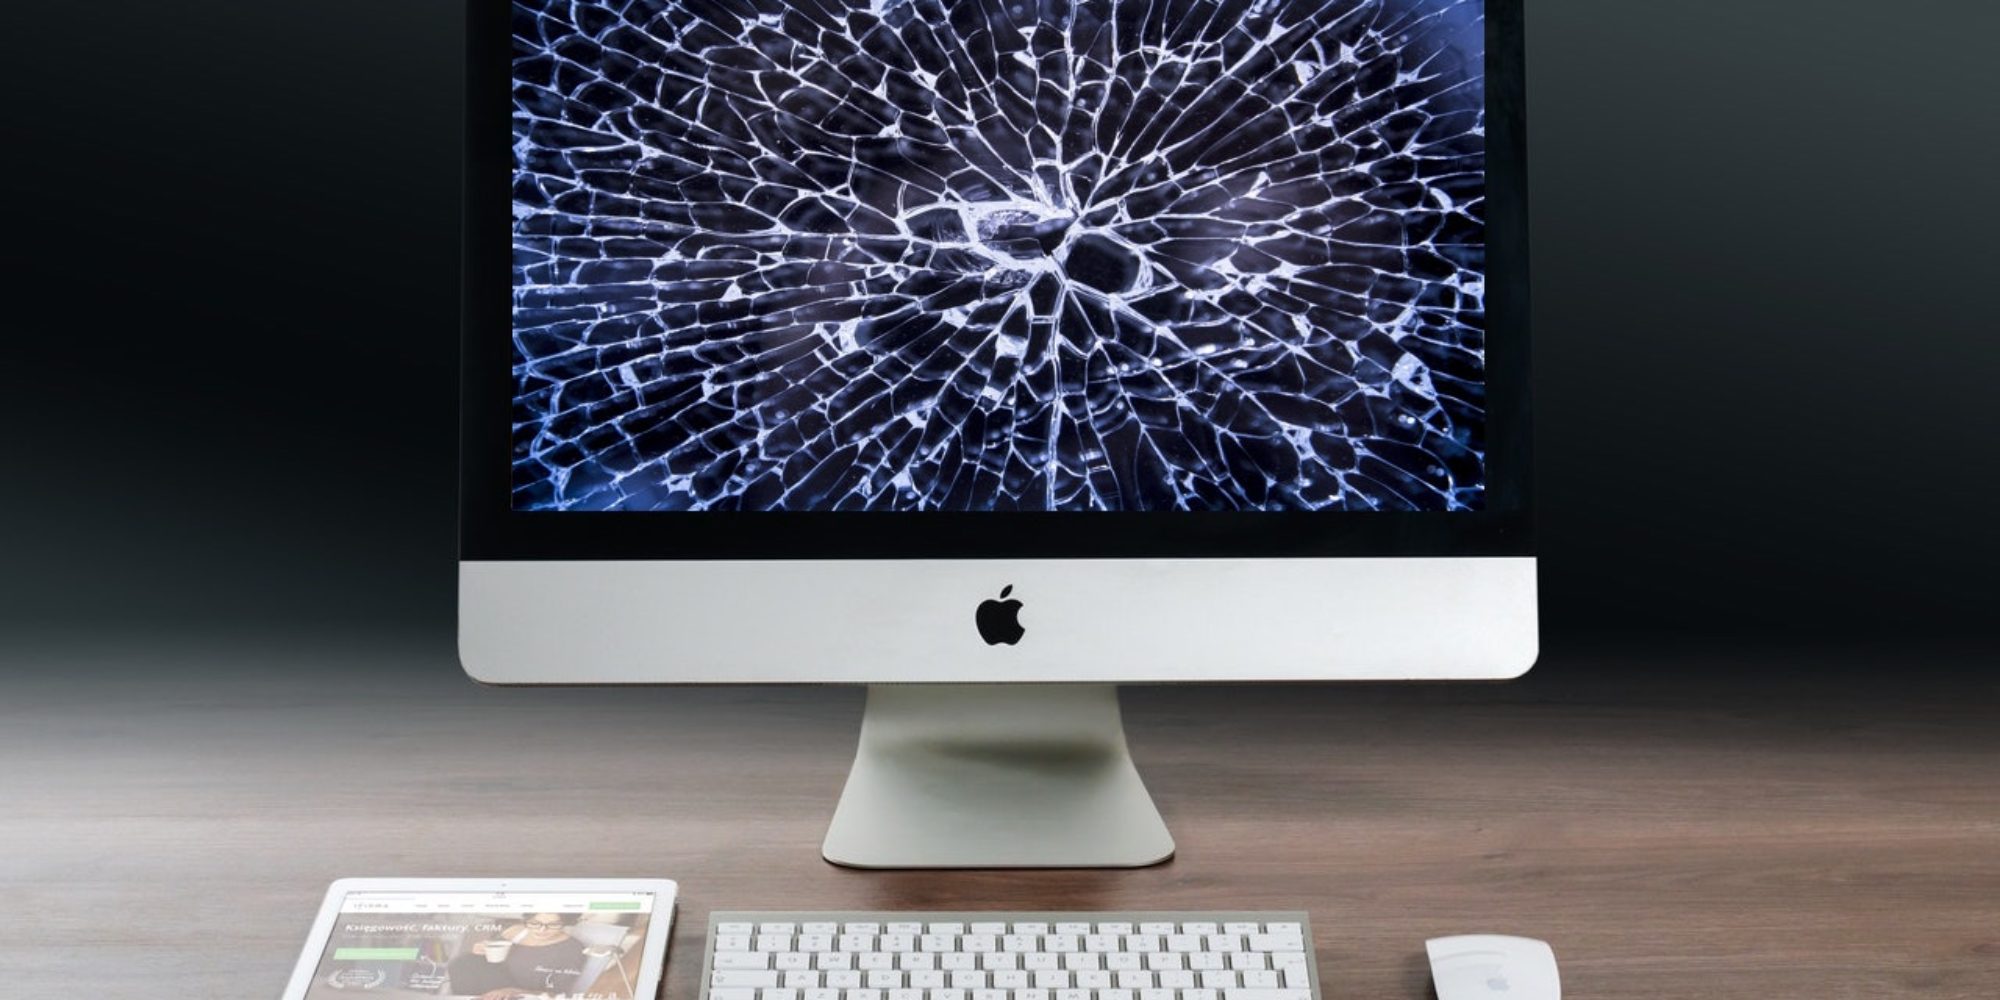 Data Backup Strategies Go Only So Far—What’s Your Plan If Your Mac Dies?